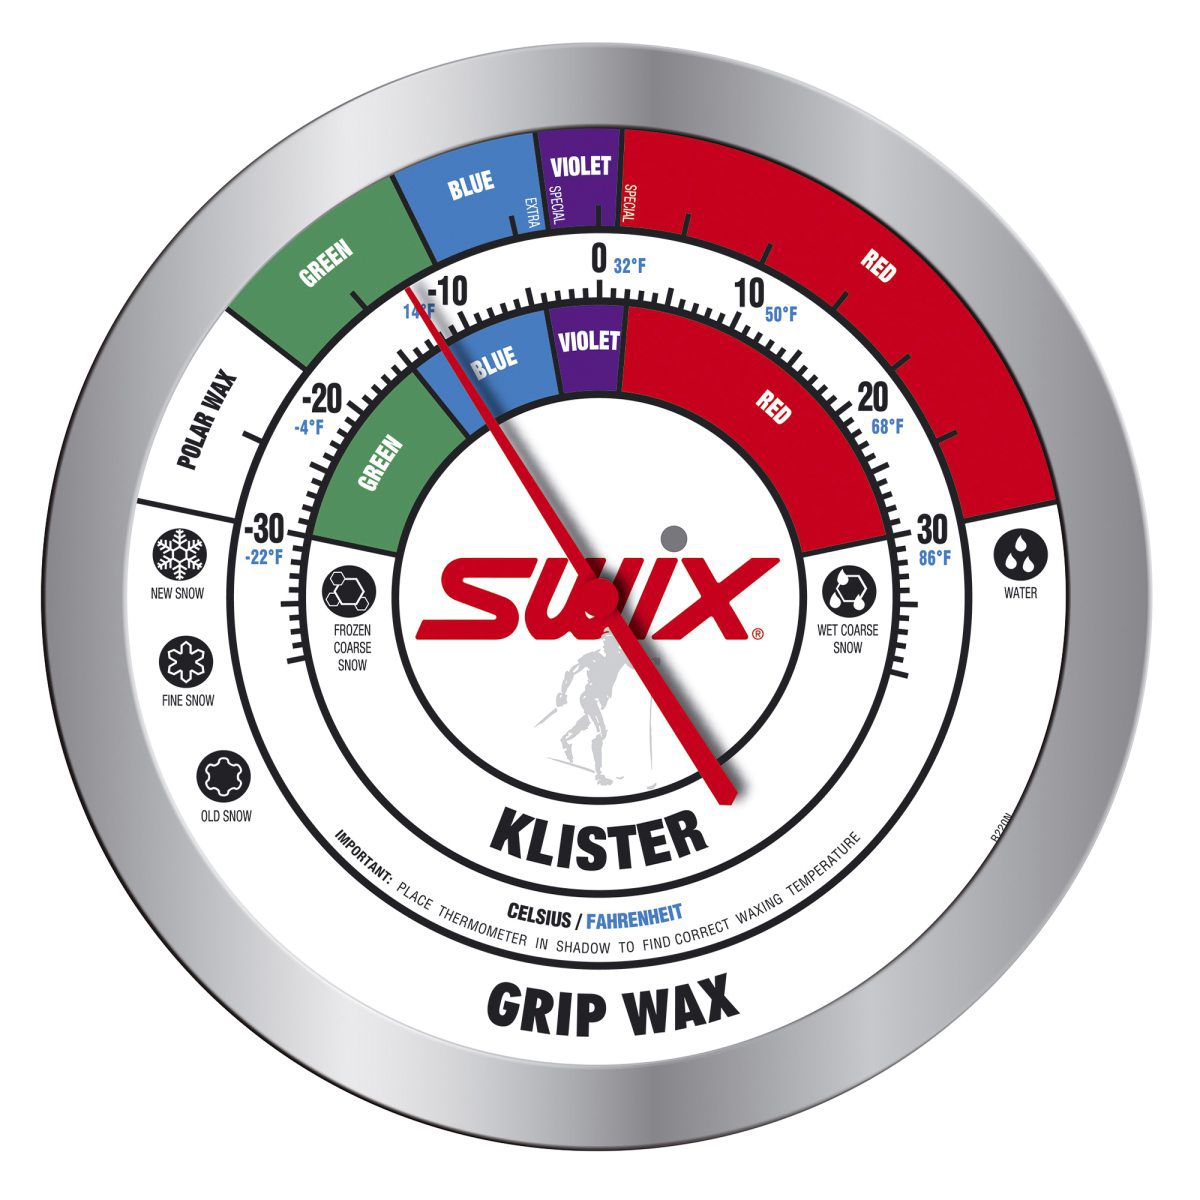 Swix R0220N Round Wall thermometer